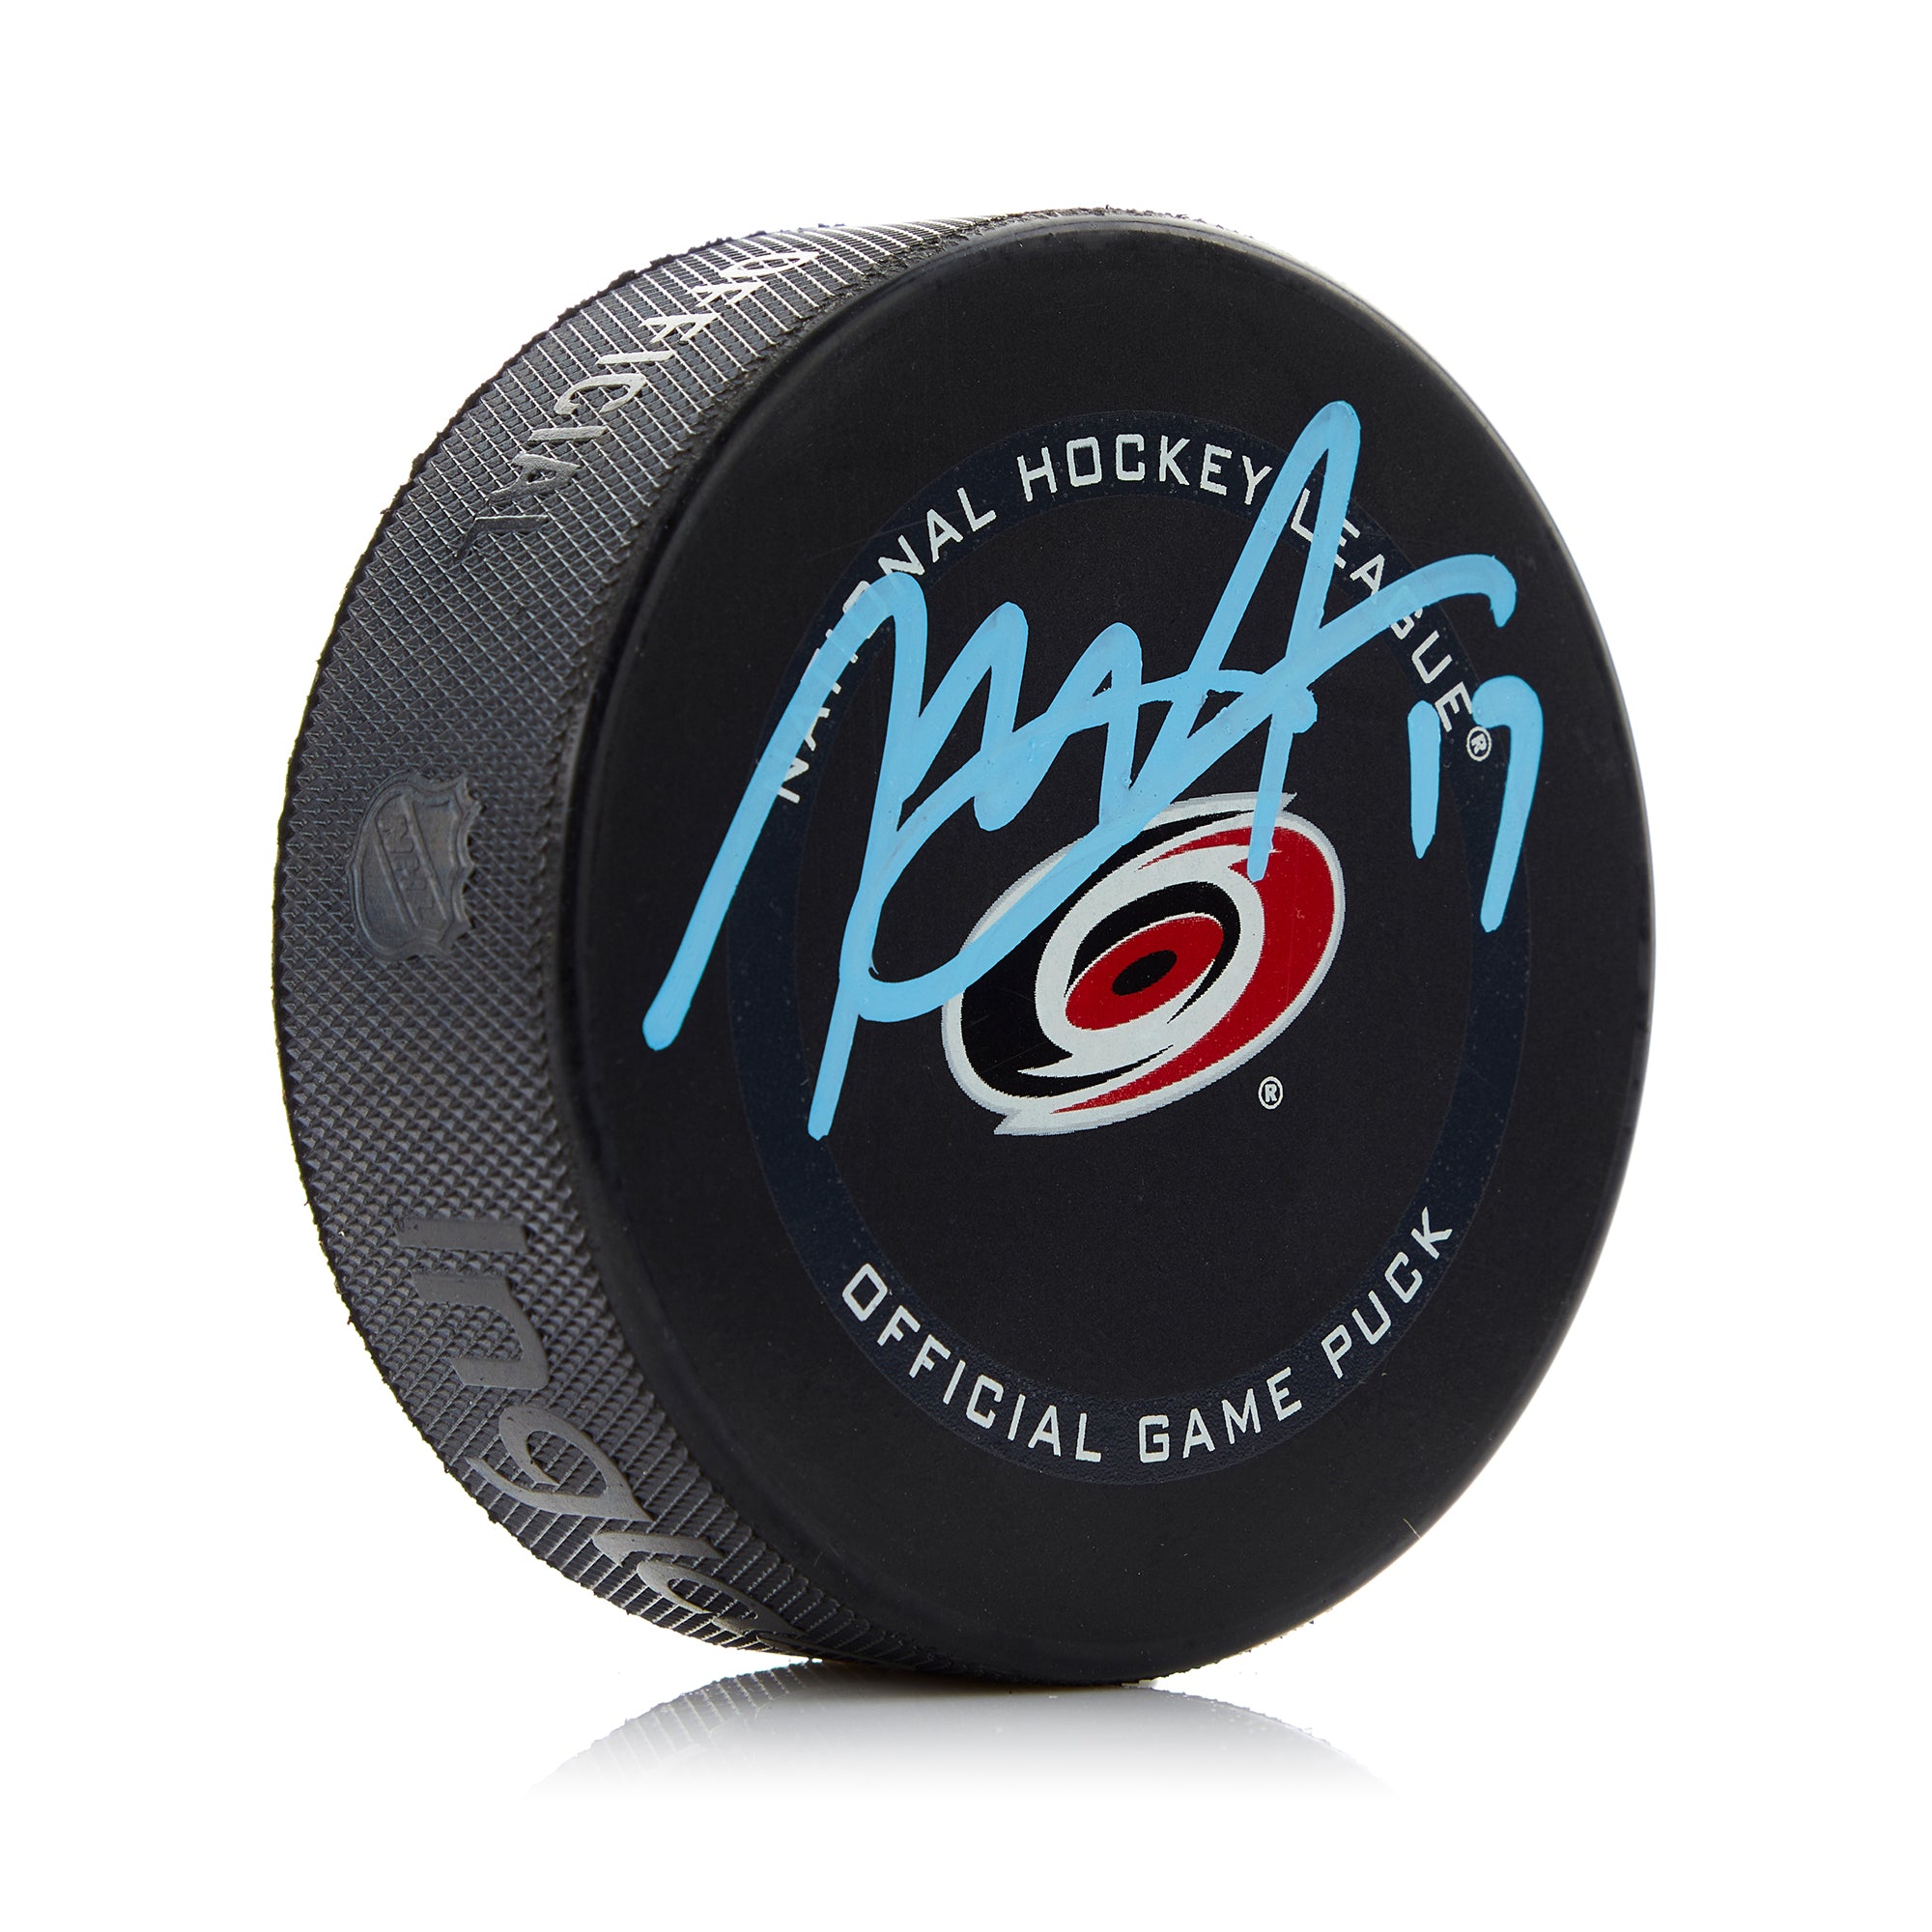 Rod Brind'Amour Carolina Hurricanes Signed Official Game Puck